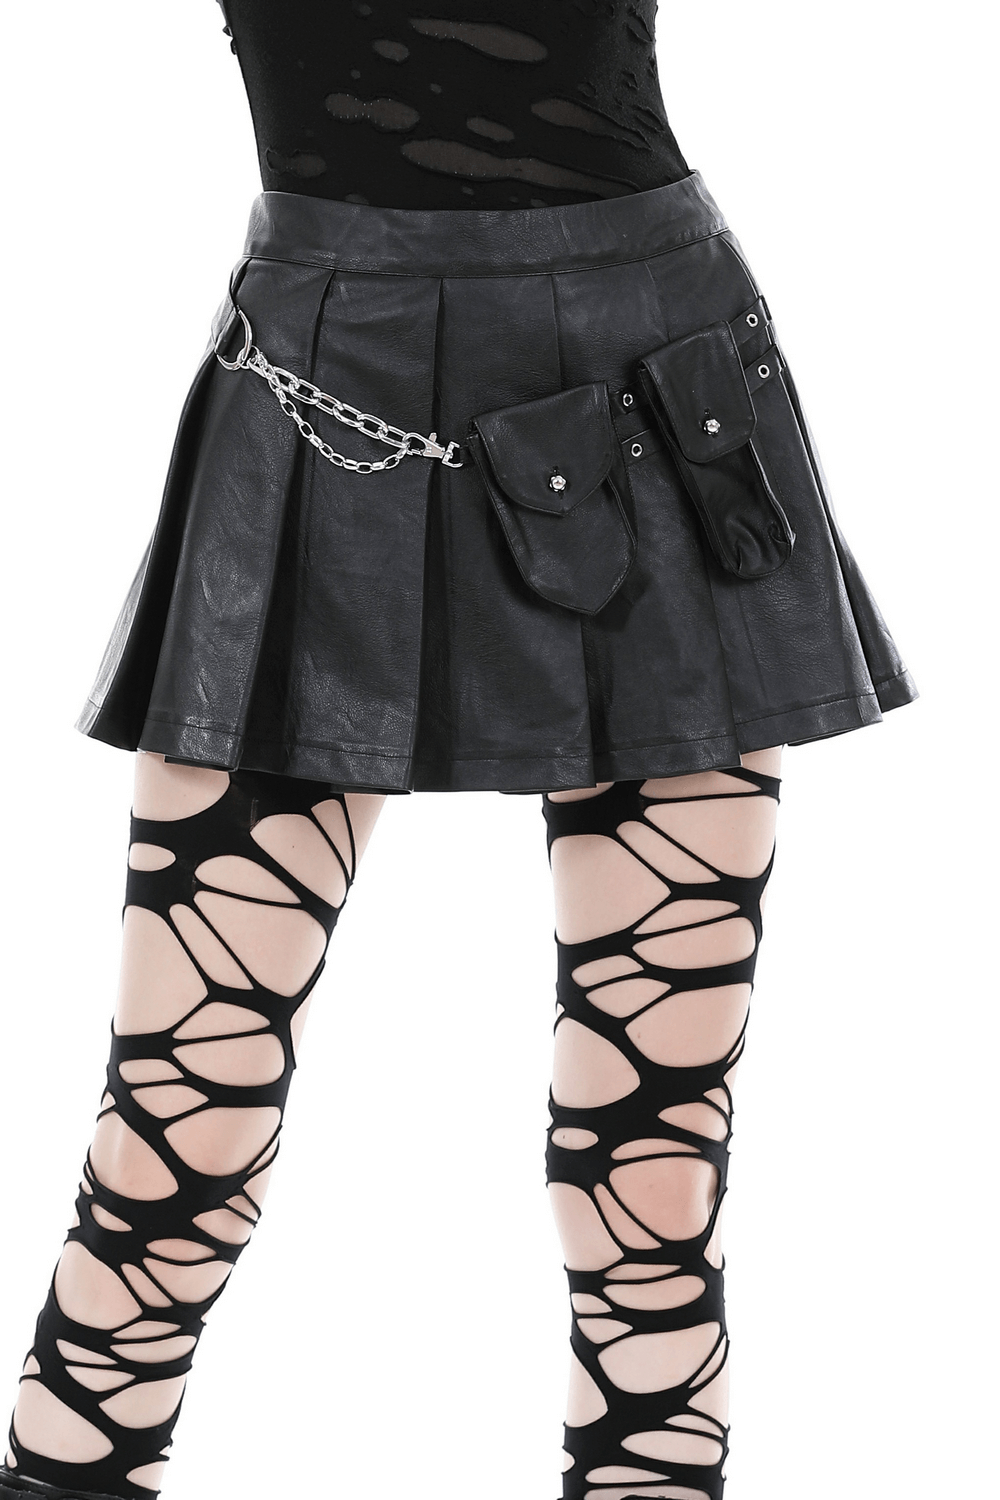 Women's Gothic Punk Mini Skirt with Chain and Side Pockets